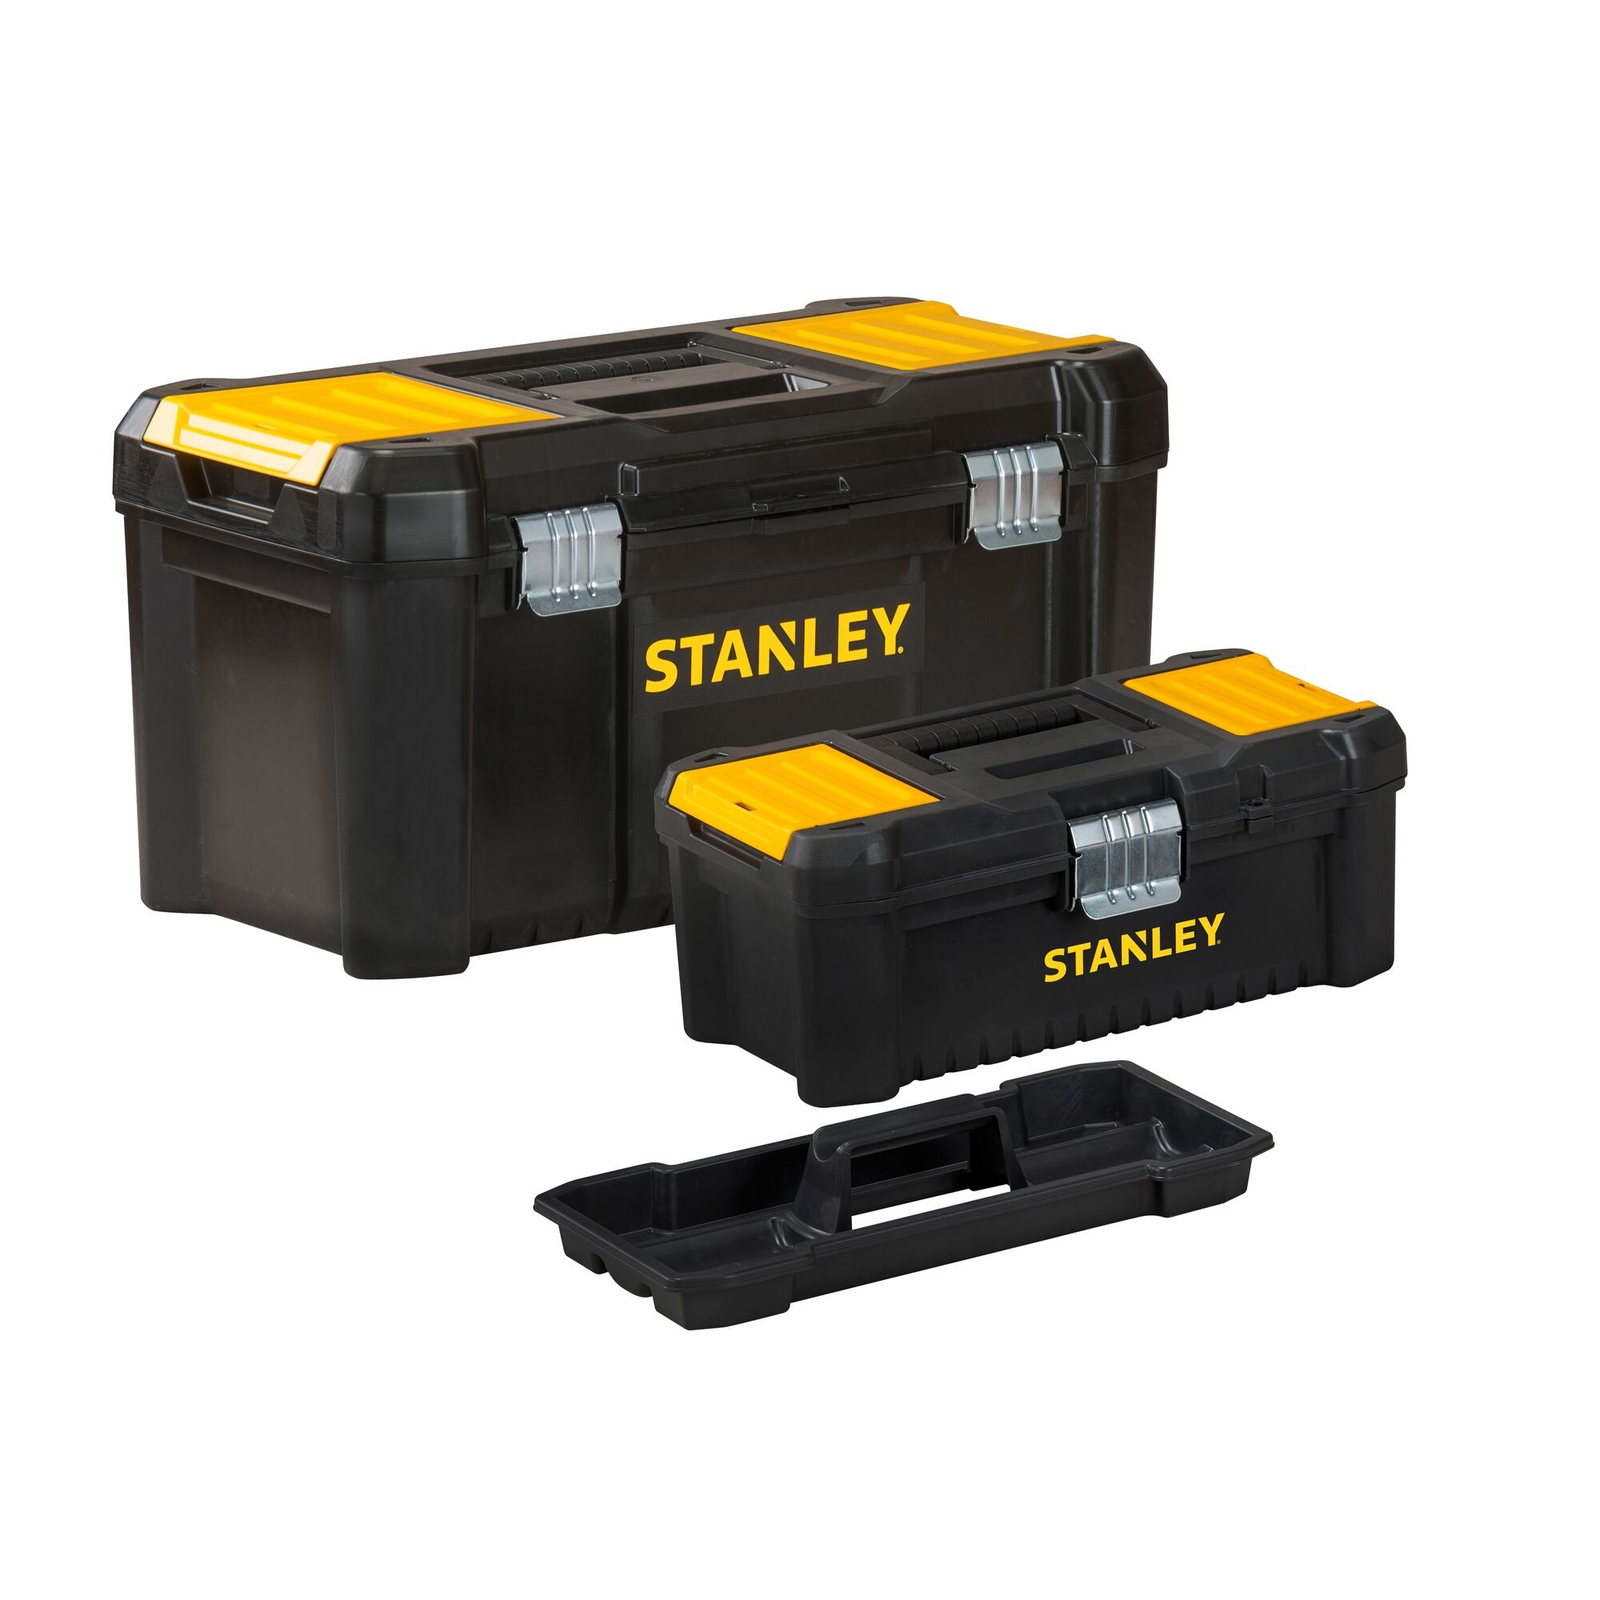 STANLEY Essential Tool Boxes with Metal Latches - 2 Pack 12.5 inch and 19 inch